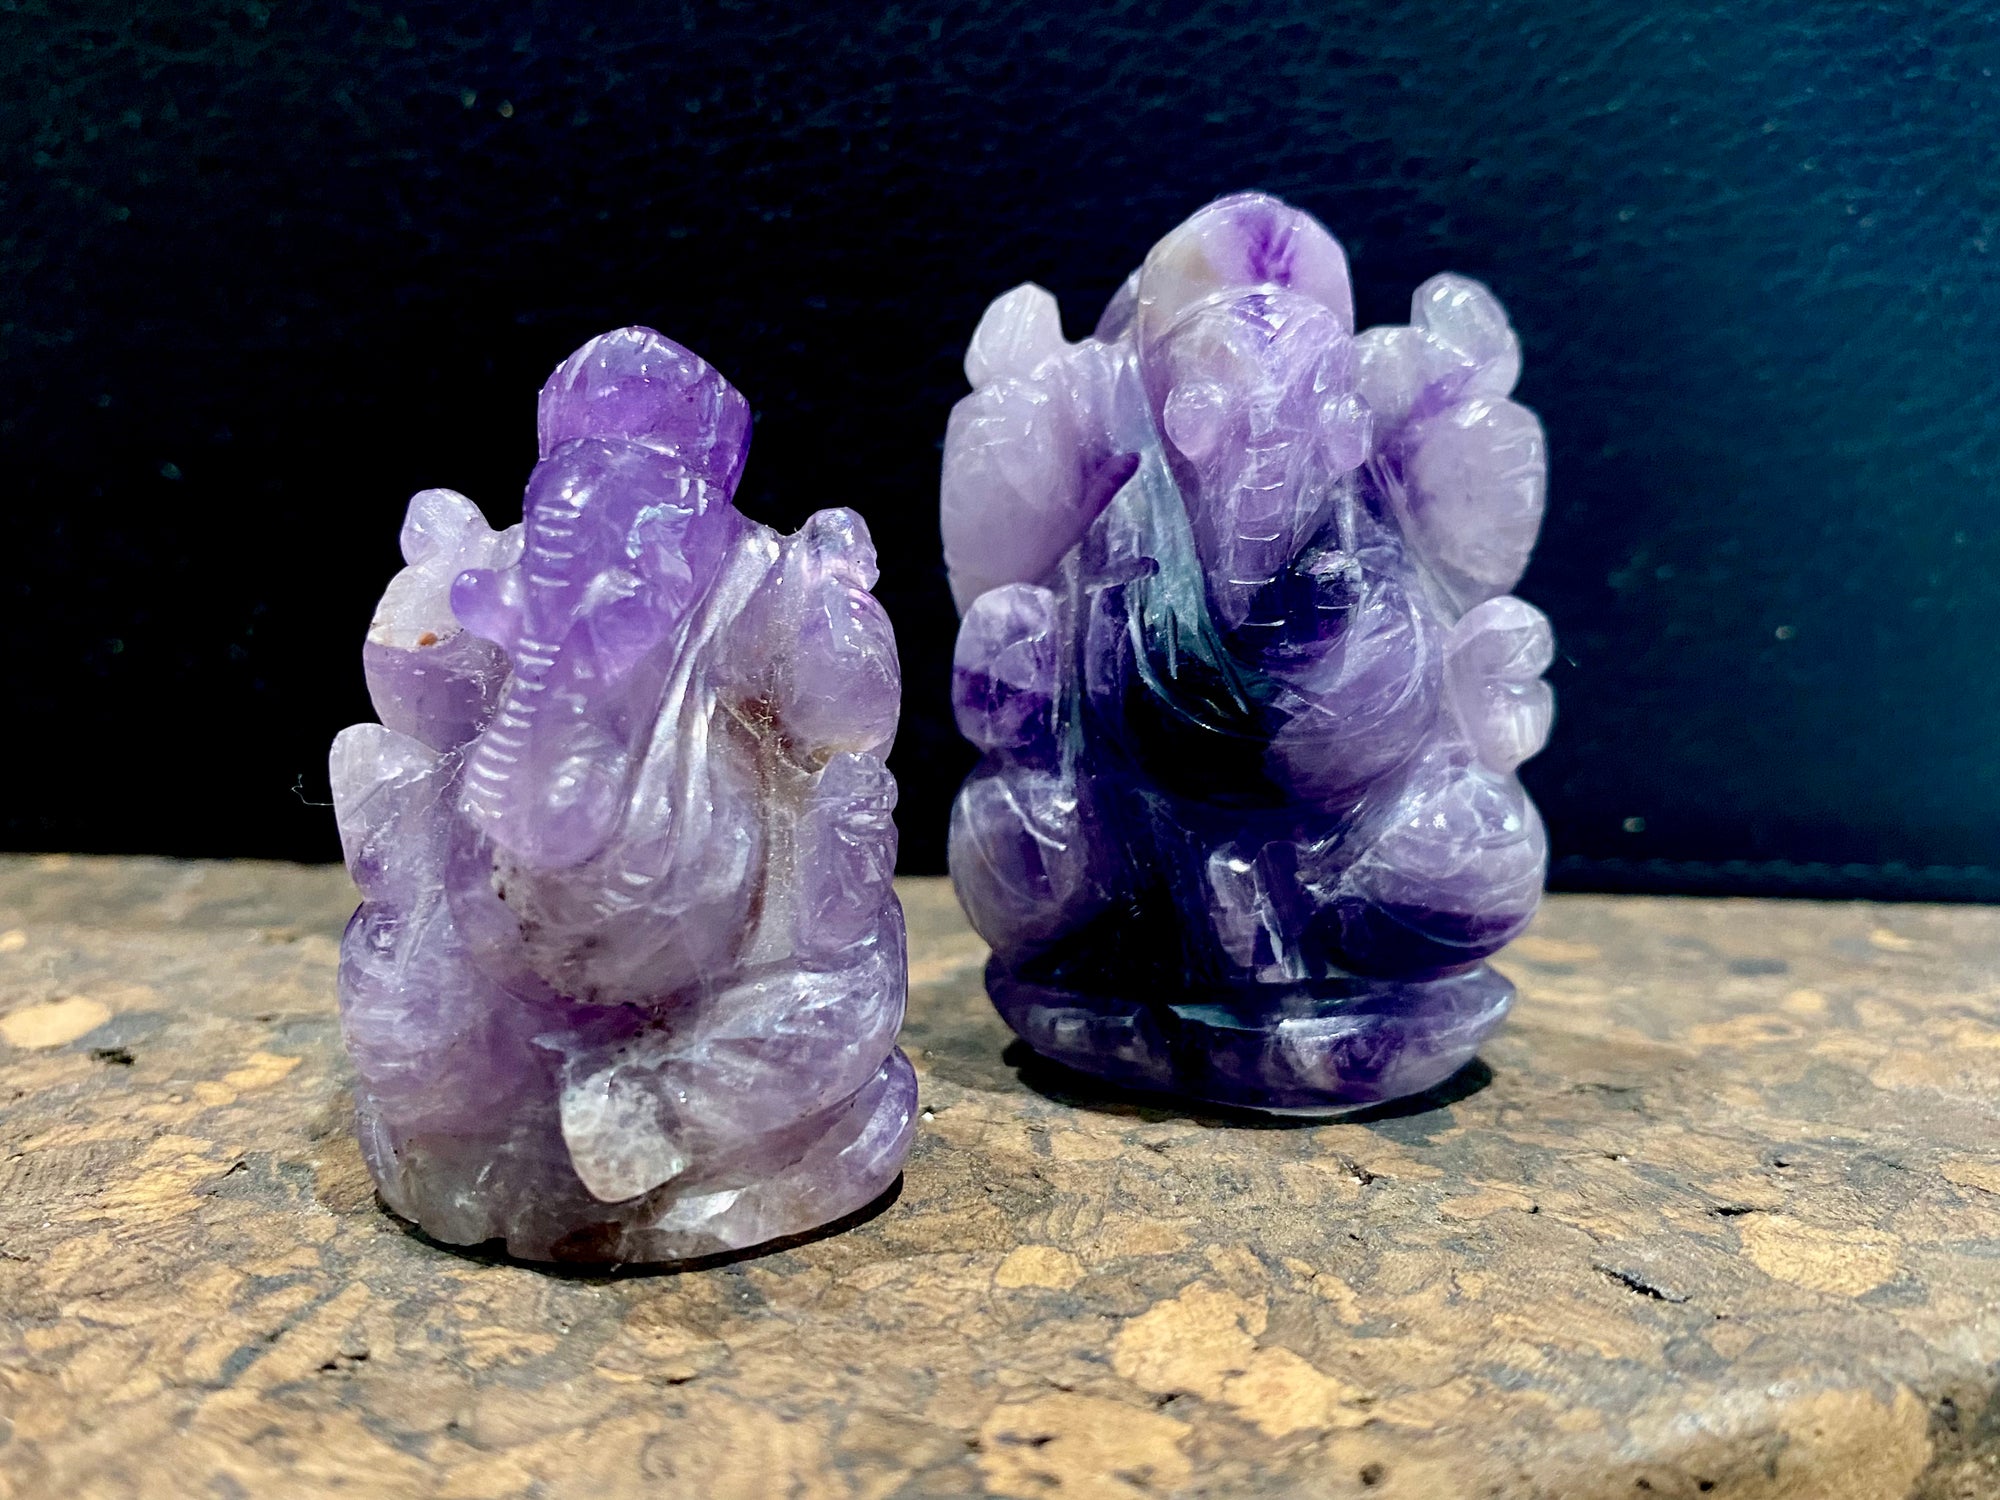 Hand carved from high quality, solid chunks of amethyst crystal, measurements: Large - 4.3 cm height, width at base 3 cm, Small - 3.7 cm height, width at base 2.6 cm